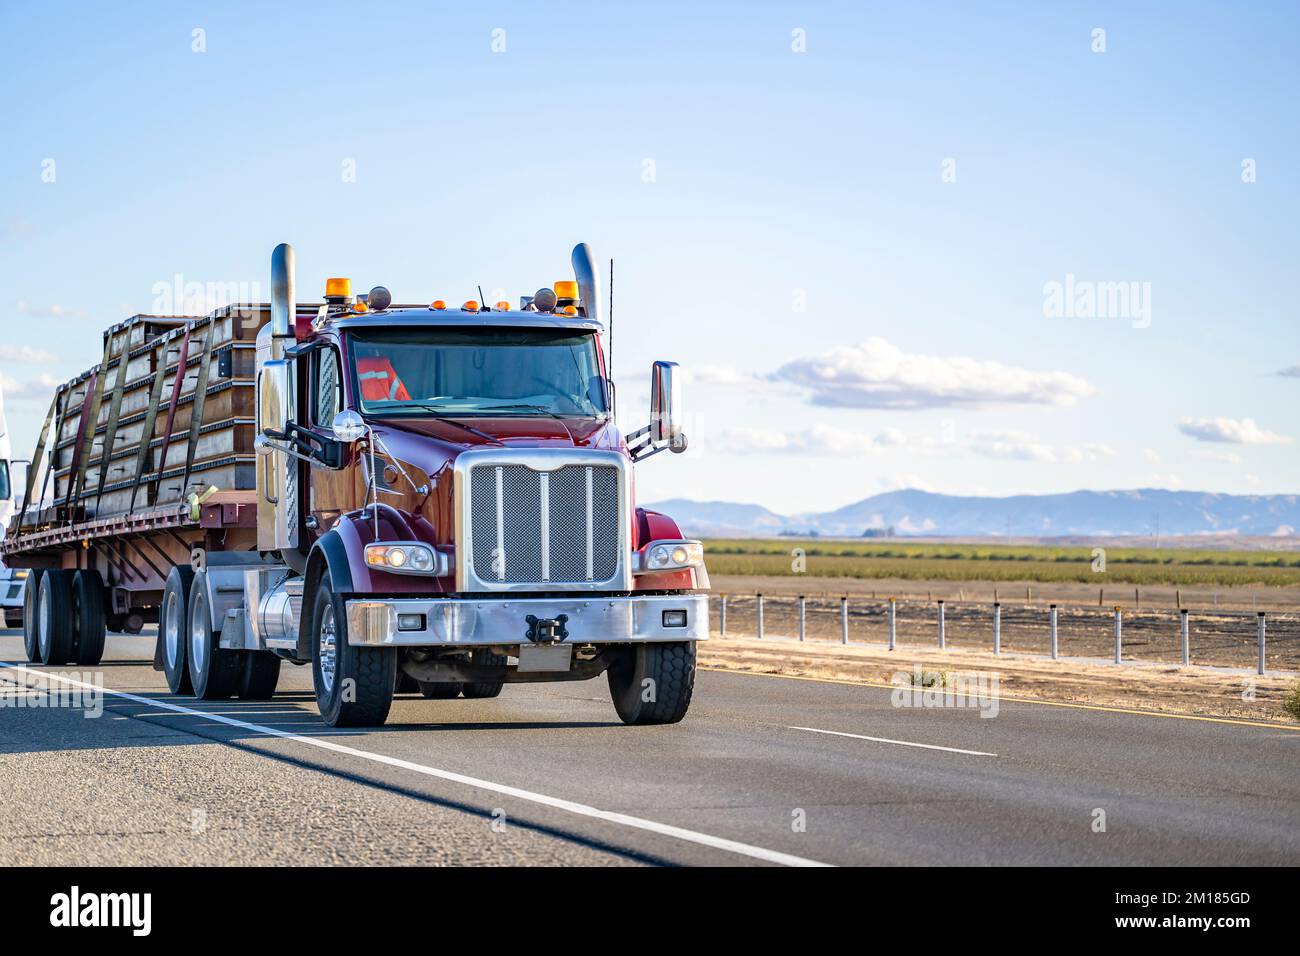 Industrial long hauler big rig dark red semi truck with chrome parts transporting fastened by slings commercial cargo on flat bed semi trailer running Stock Photo